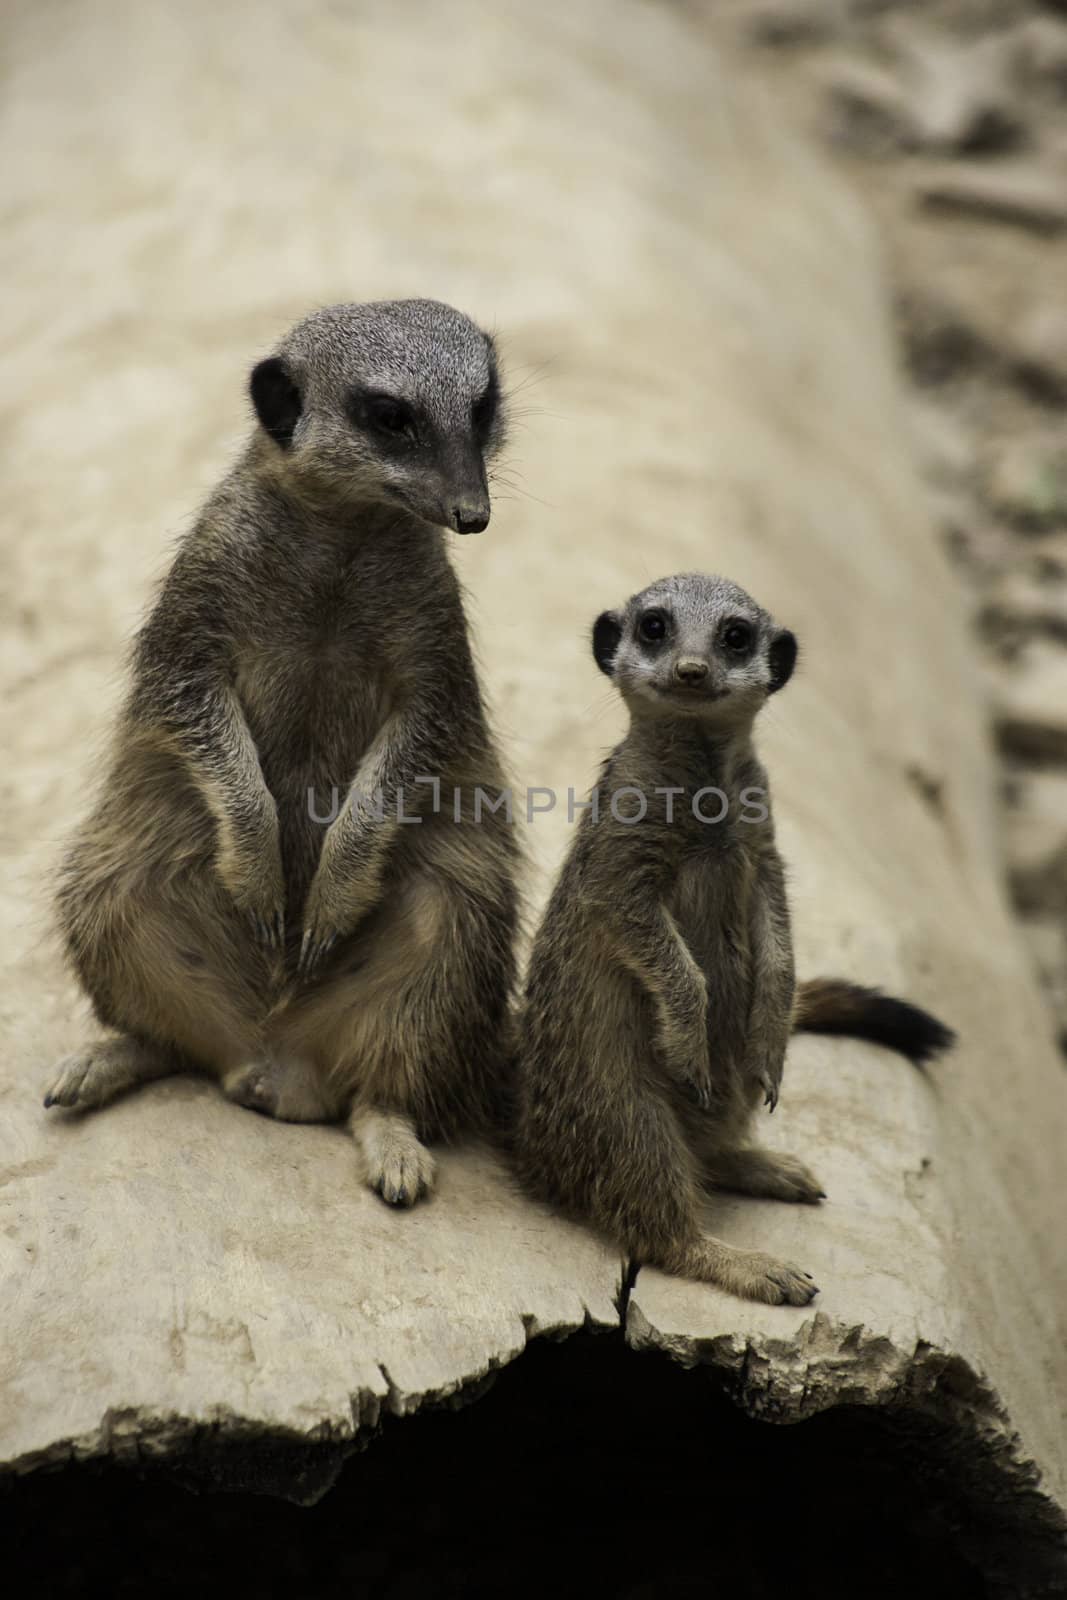 Two meerkats, Suricata suricatta, a desert mongoose from Africa, standing up looking alertly at the camera